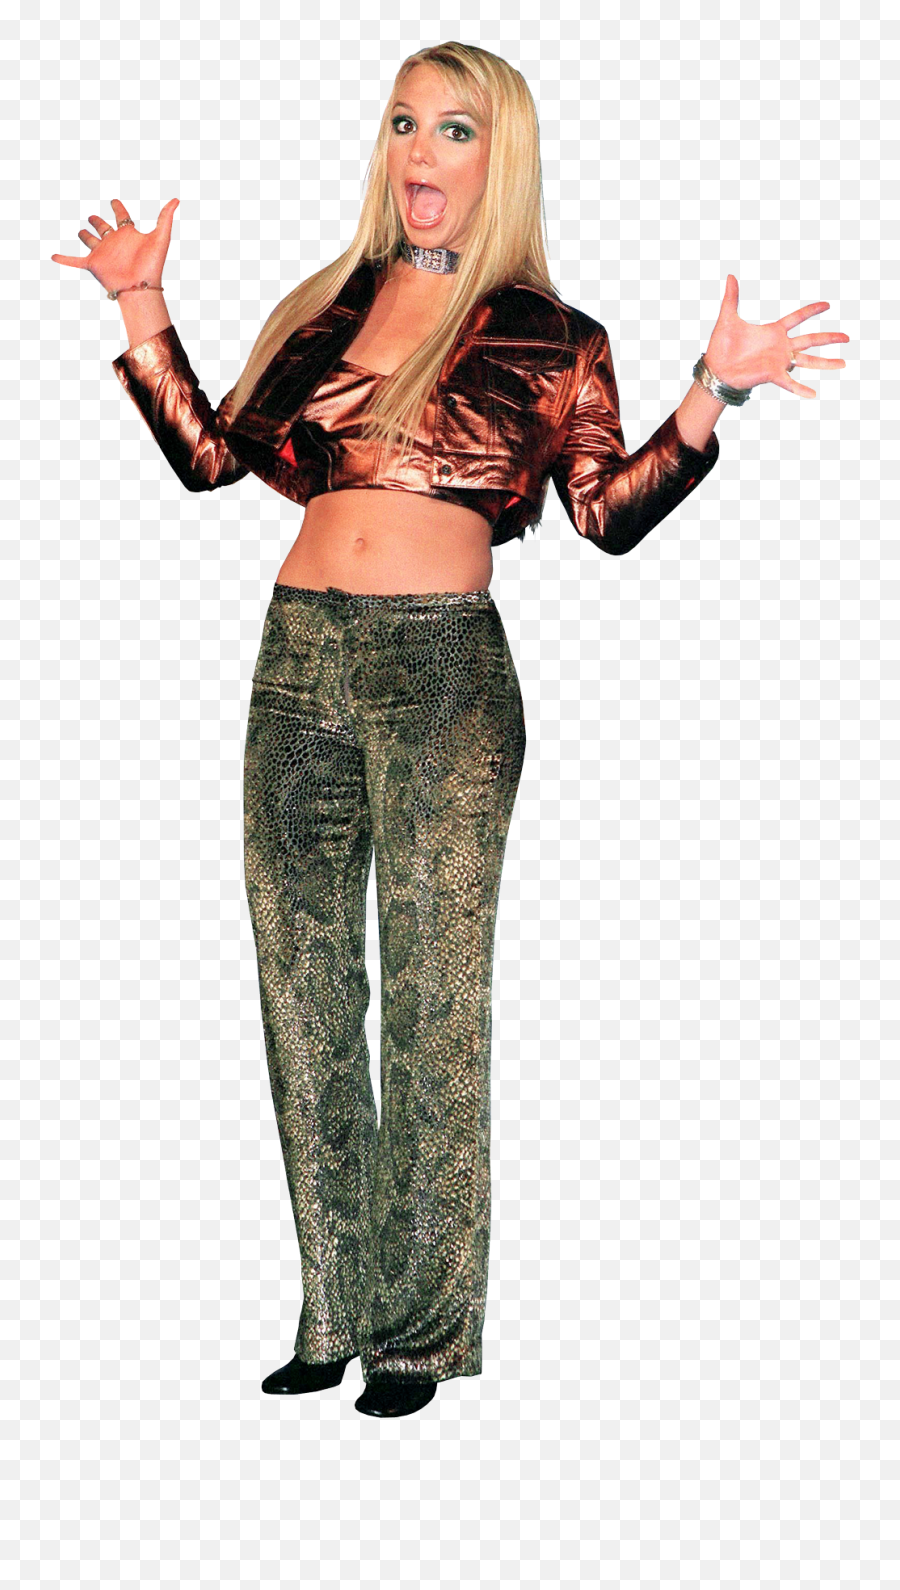 Britney Spears Png Images In - Britney Spears Transparent Background,Britney Spears Png